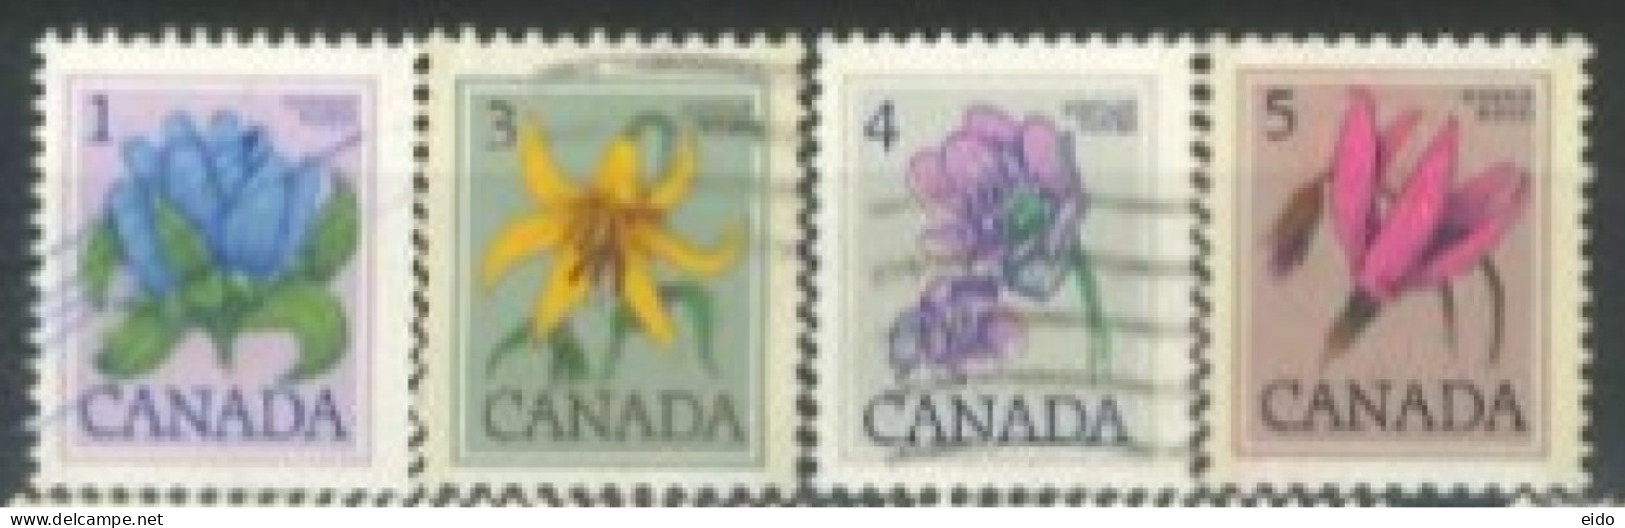 CANADA - 1977, FLOWERS STAMPS SET OF 4, USED. - Used Stamps